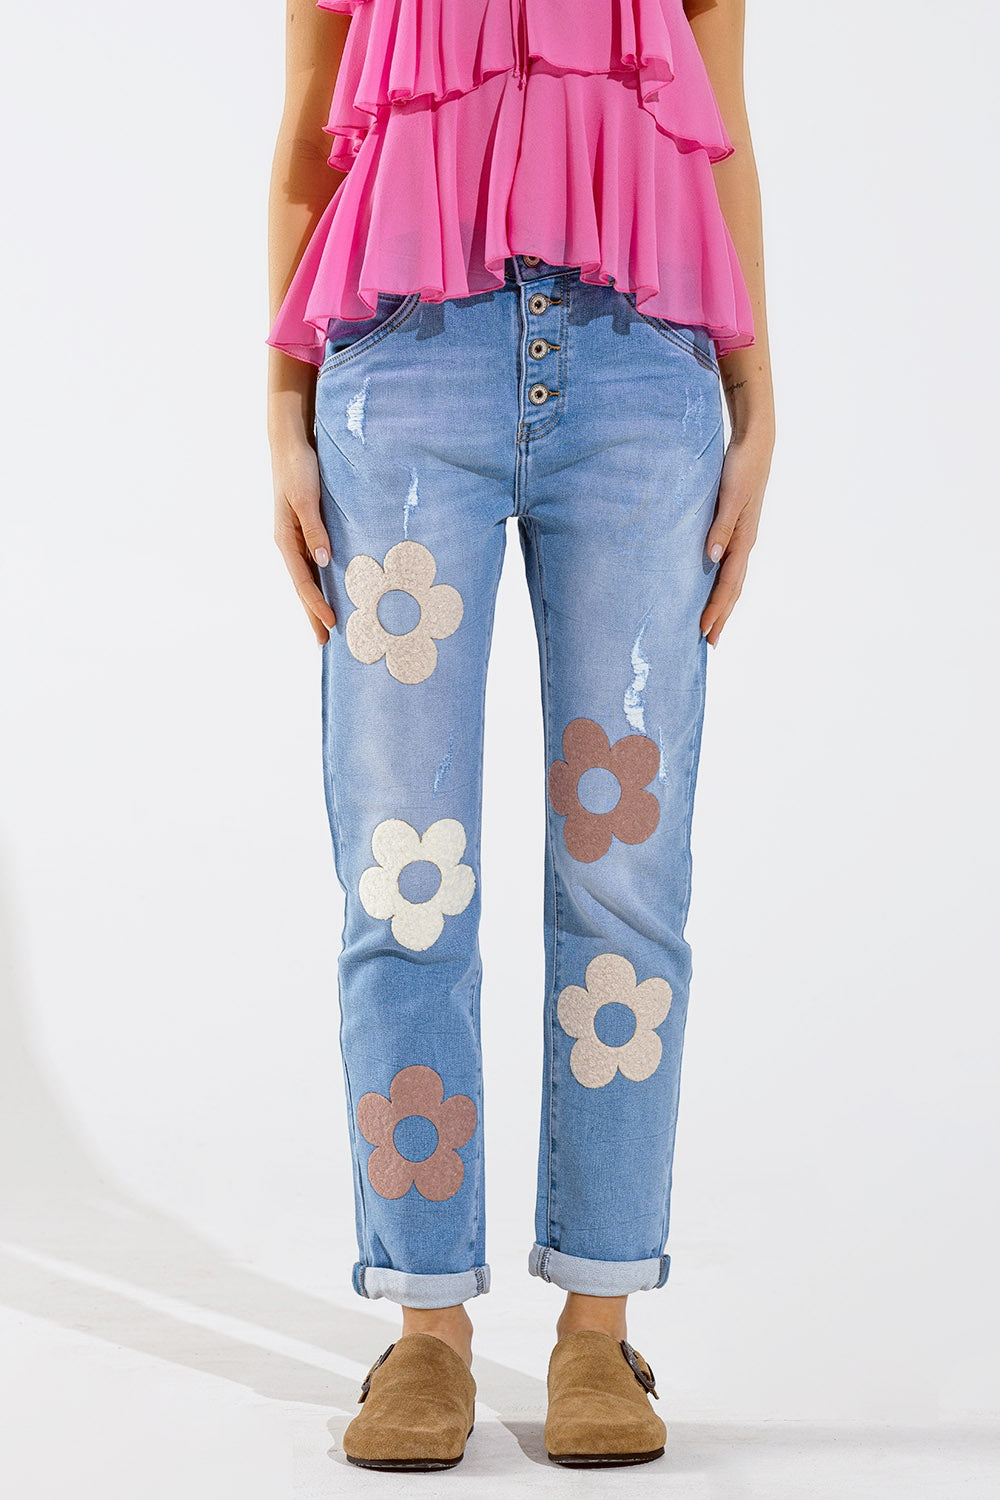 Q2 Straight Jeans With Button Closing and Flower Detail in Front